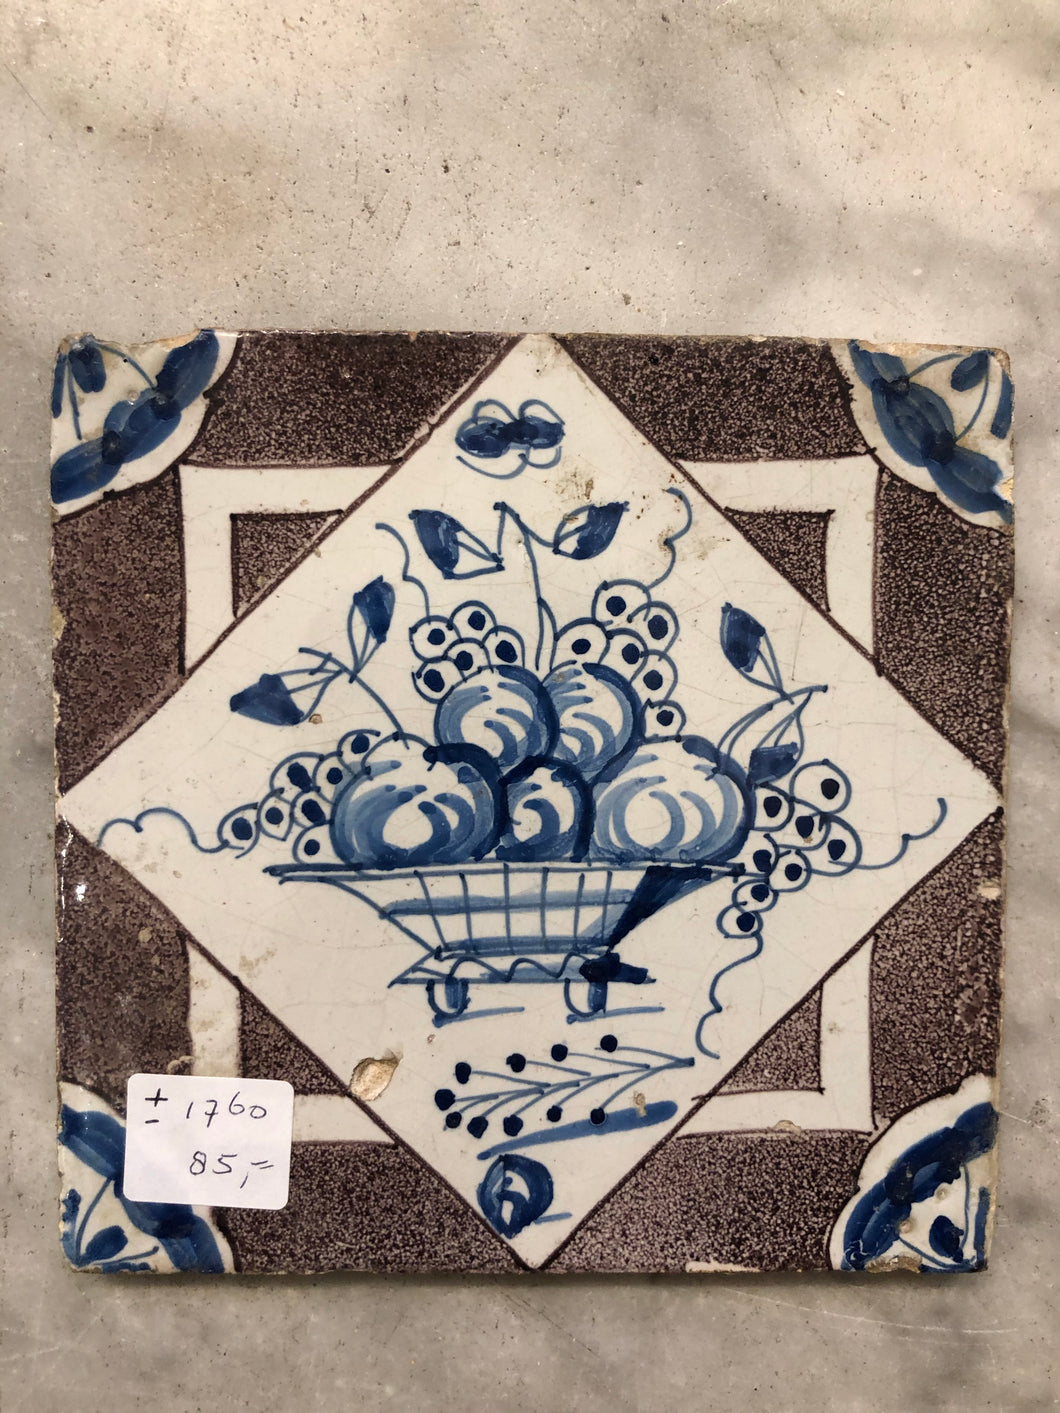 18th century Delft handpainted tile with fruits